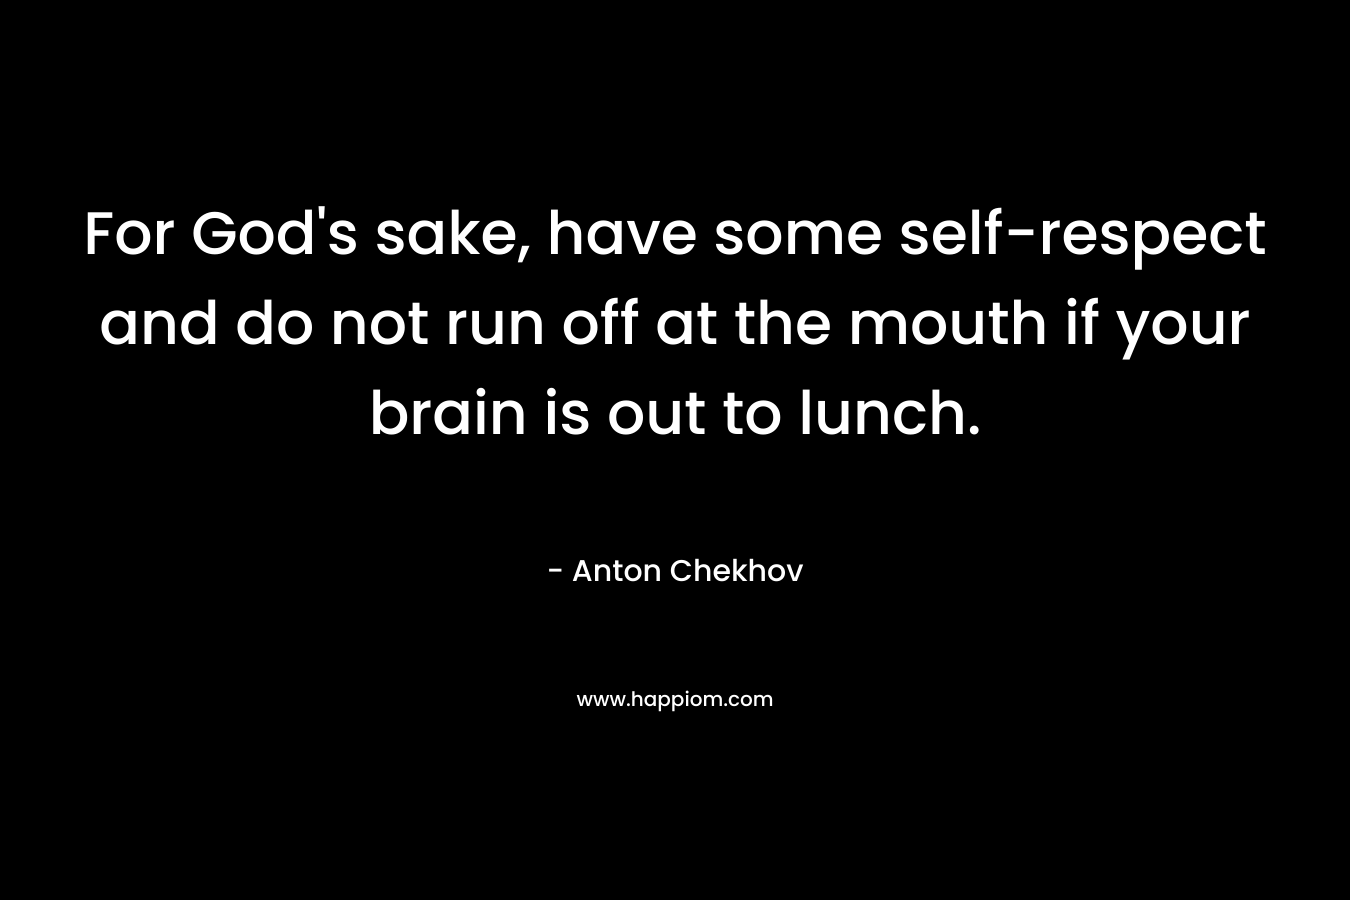 For God's sake, have some self-respect and do not run off at the mouth if your brain is out to lunch.